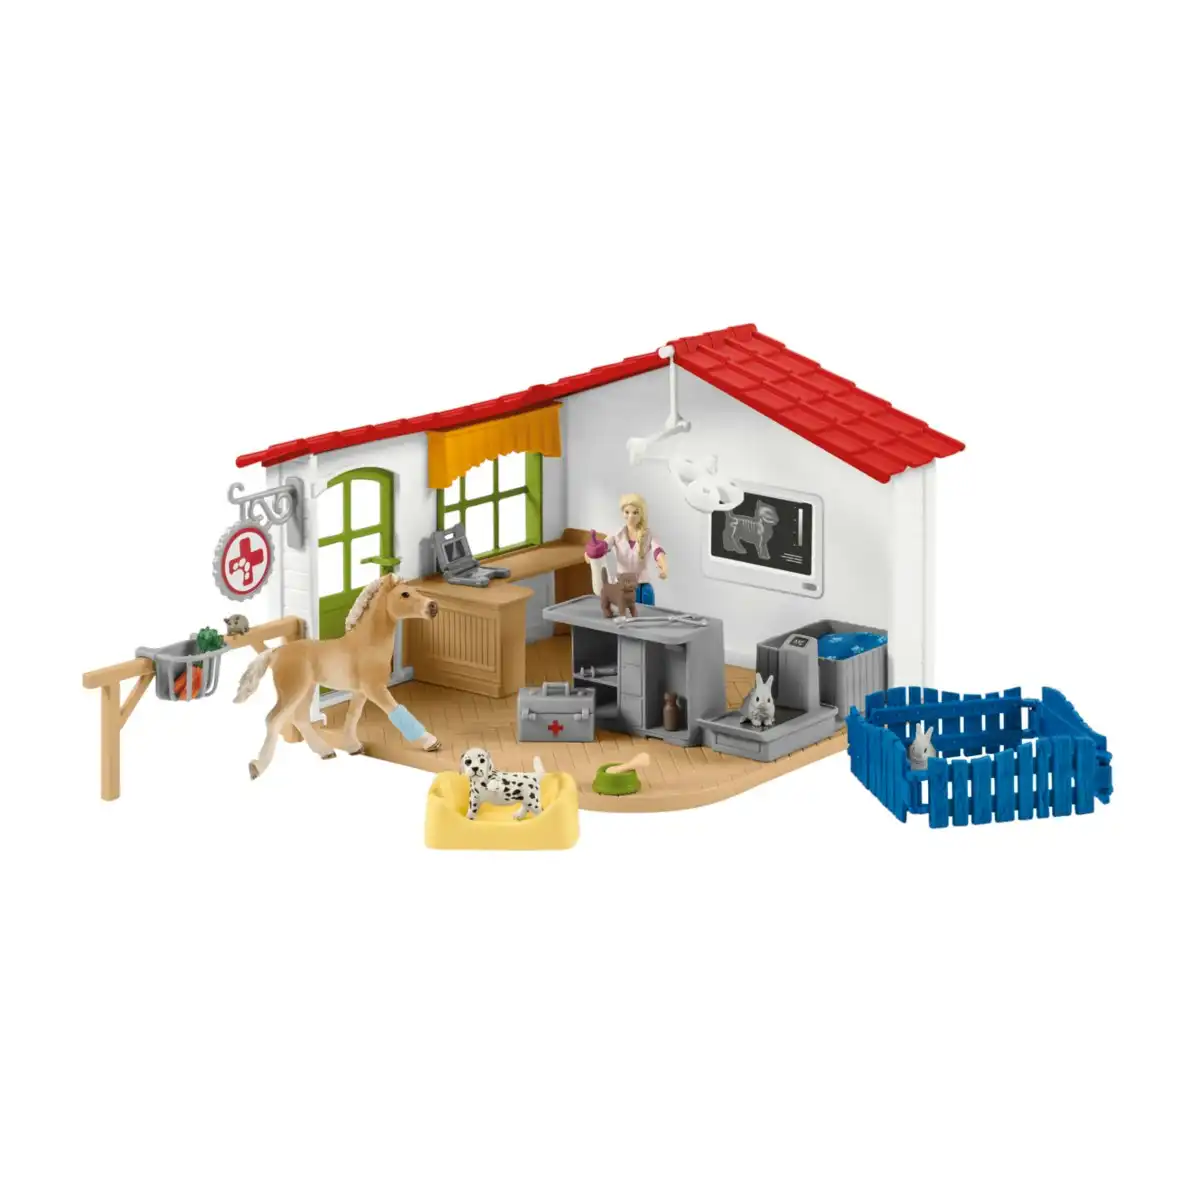 Schleich - Veterinarian Practice With Pets Animal Playset